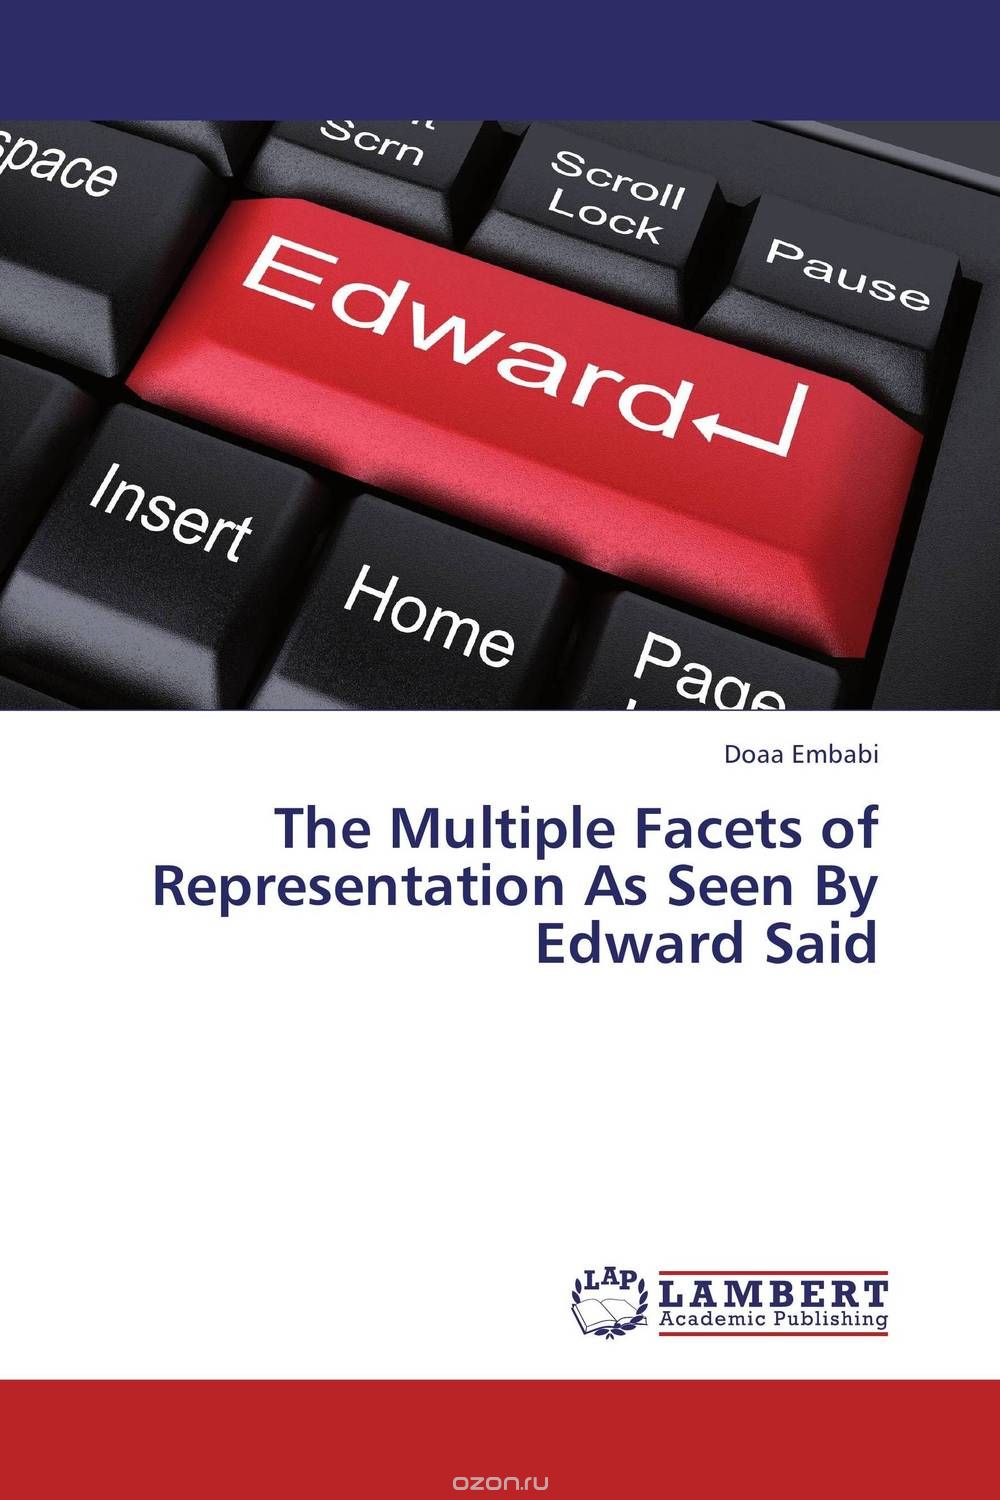 Скачать книгу "The Multiple Facets of Representation As Seen By Edward Said"